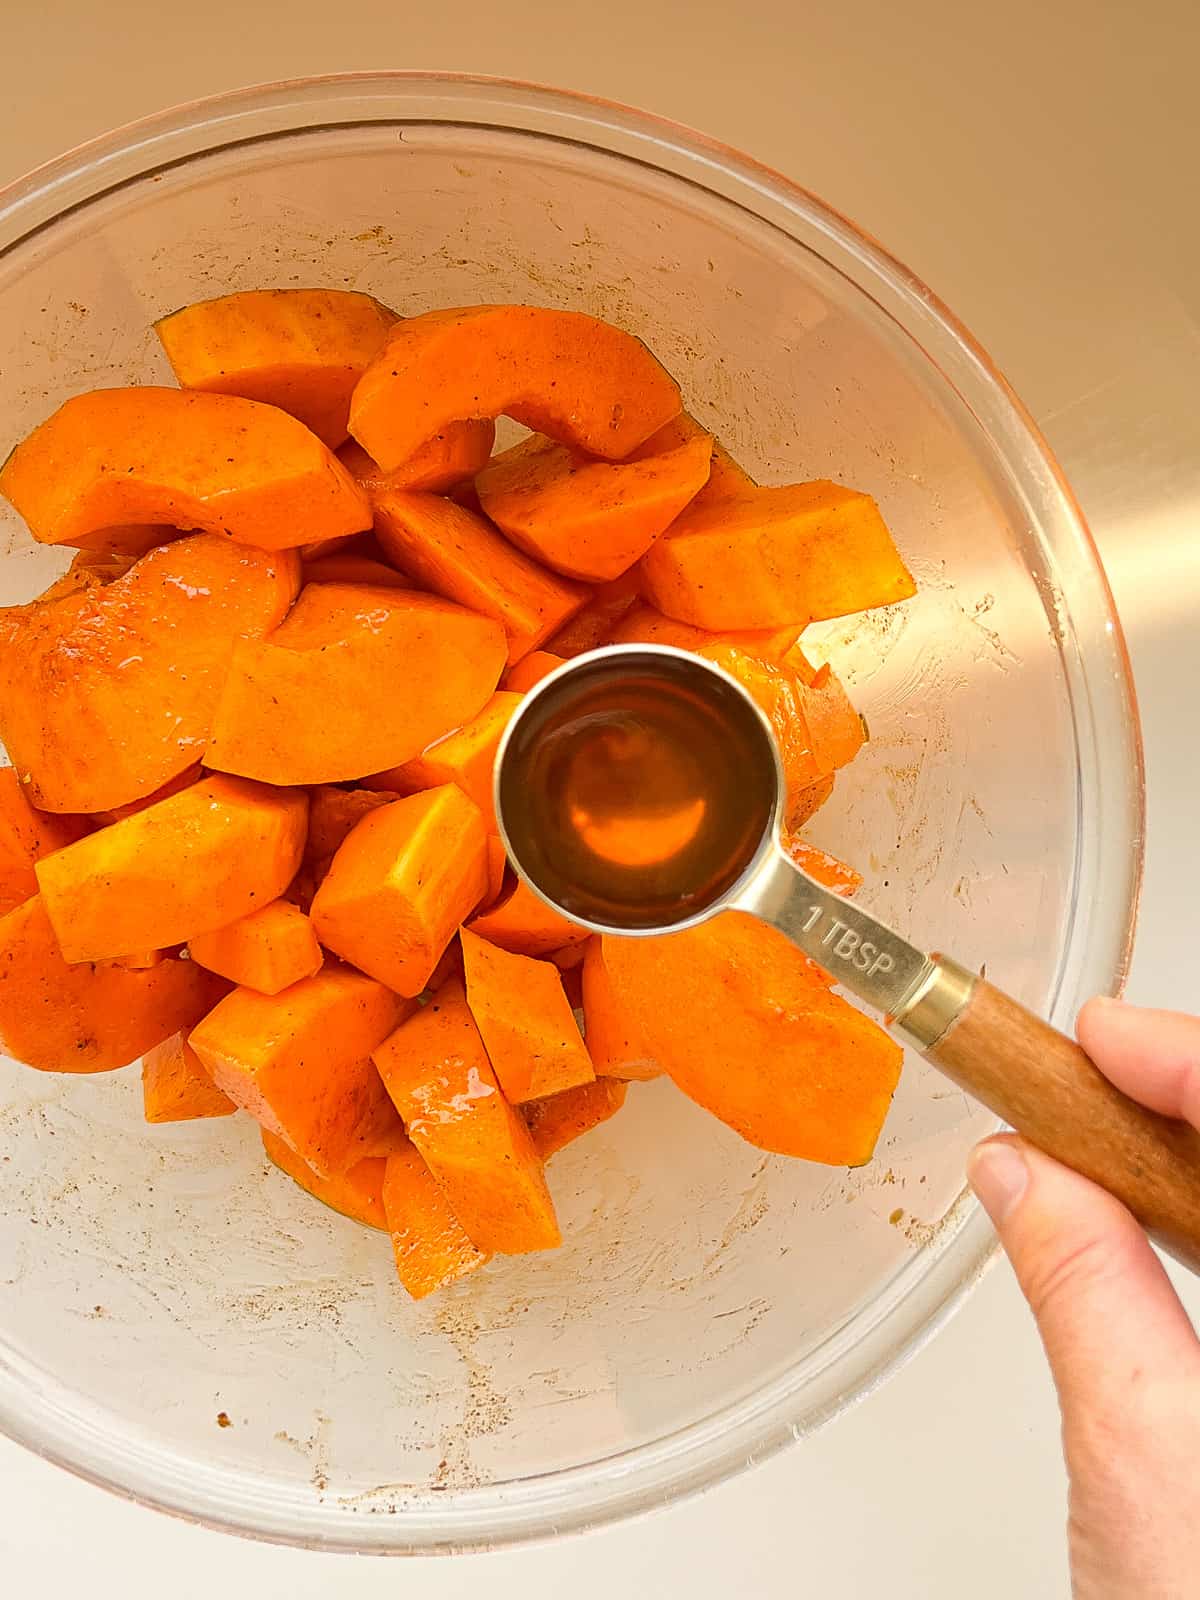 An image of maple syrup being added to a bowl of butternut squash wedges.